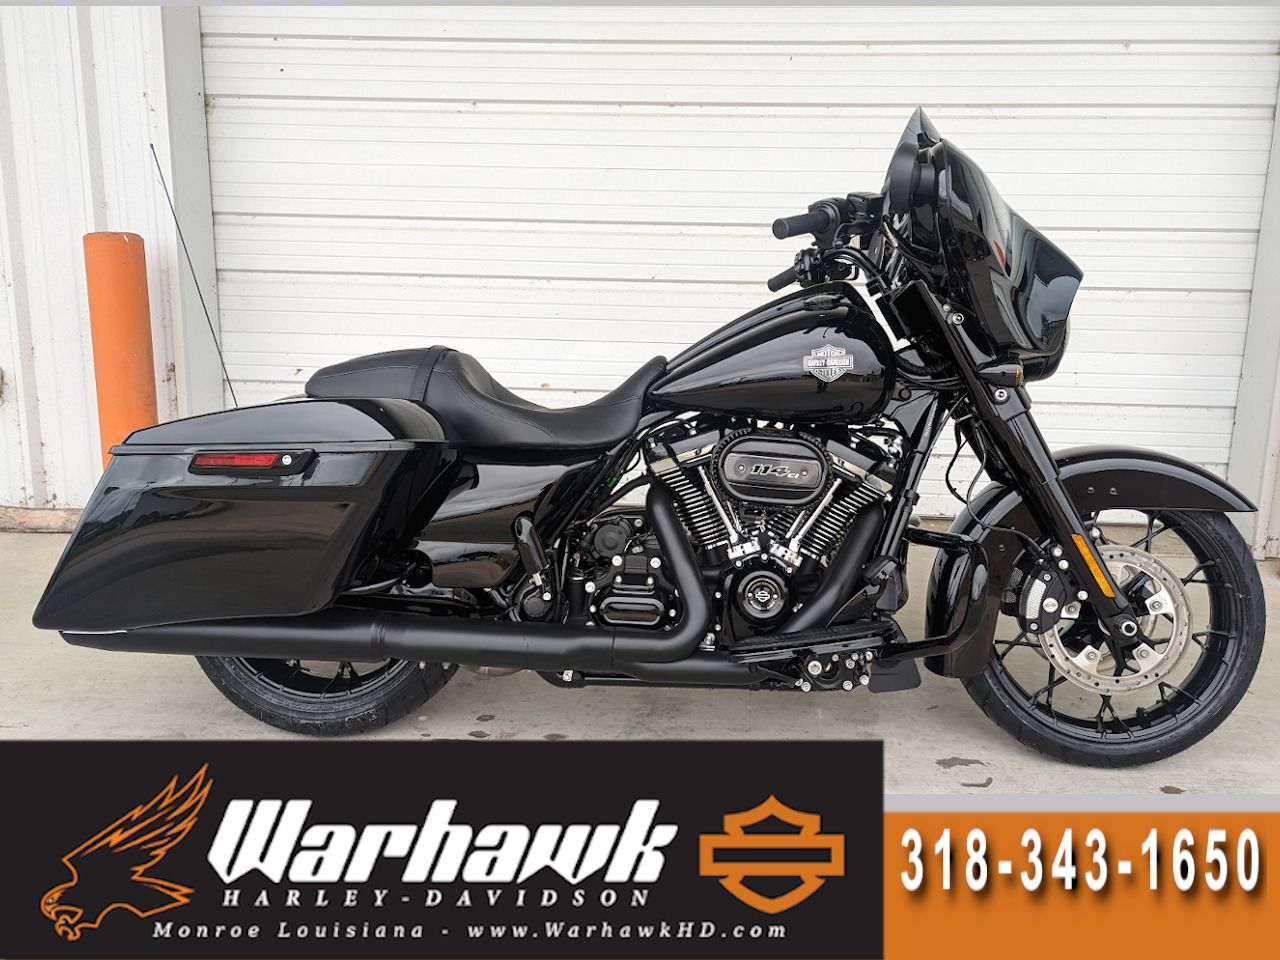 new 2023 harley davidson street glide special for sale near me - Photo 1